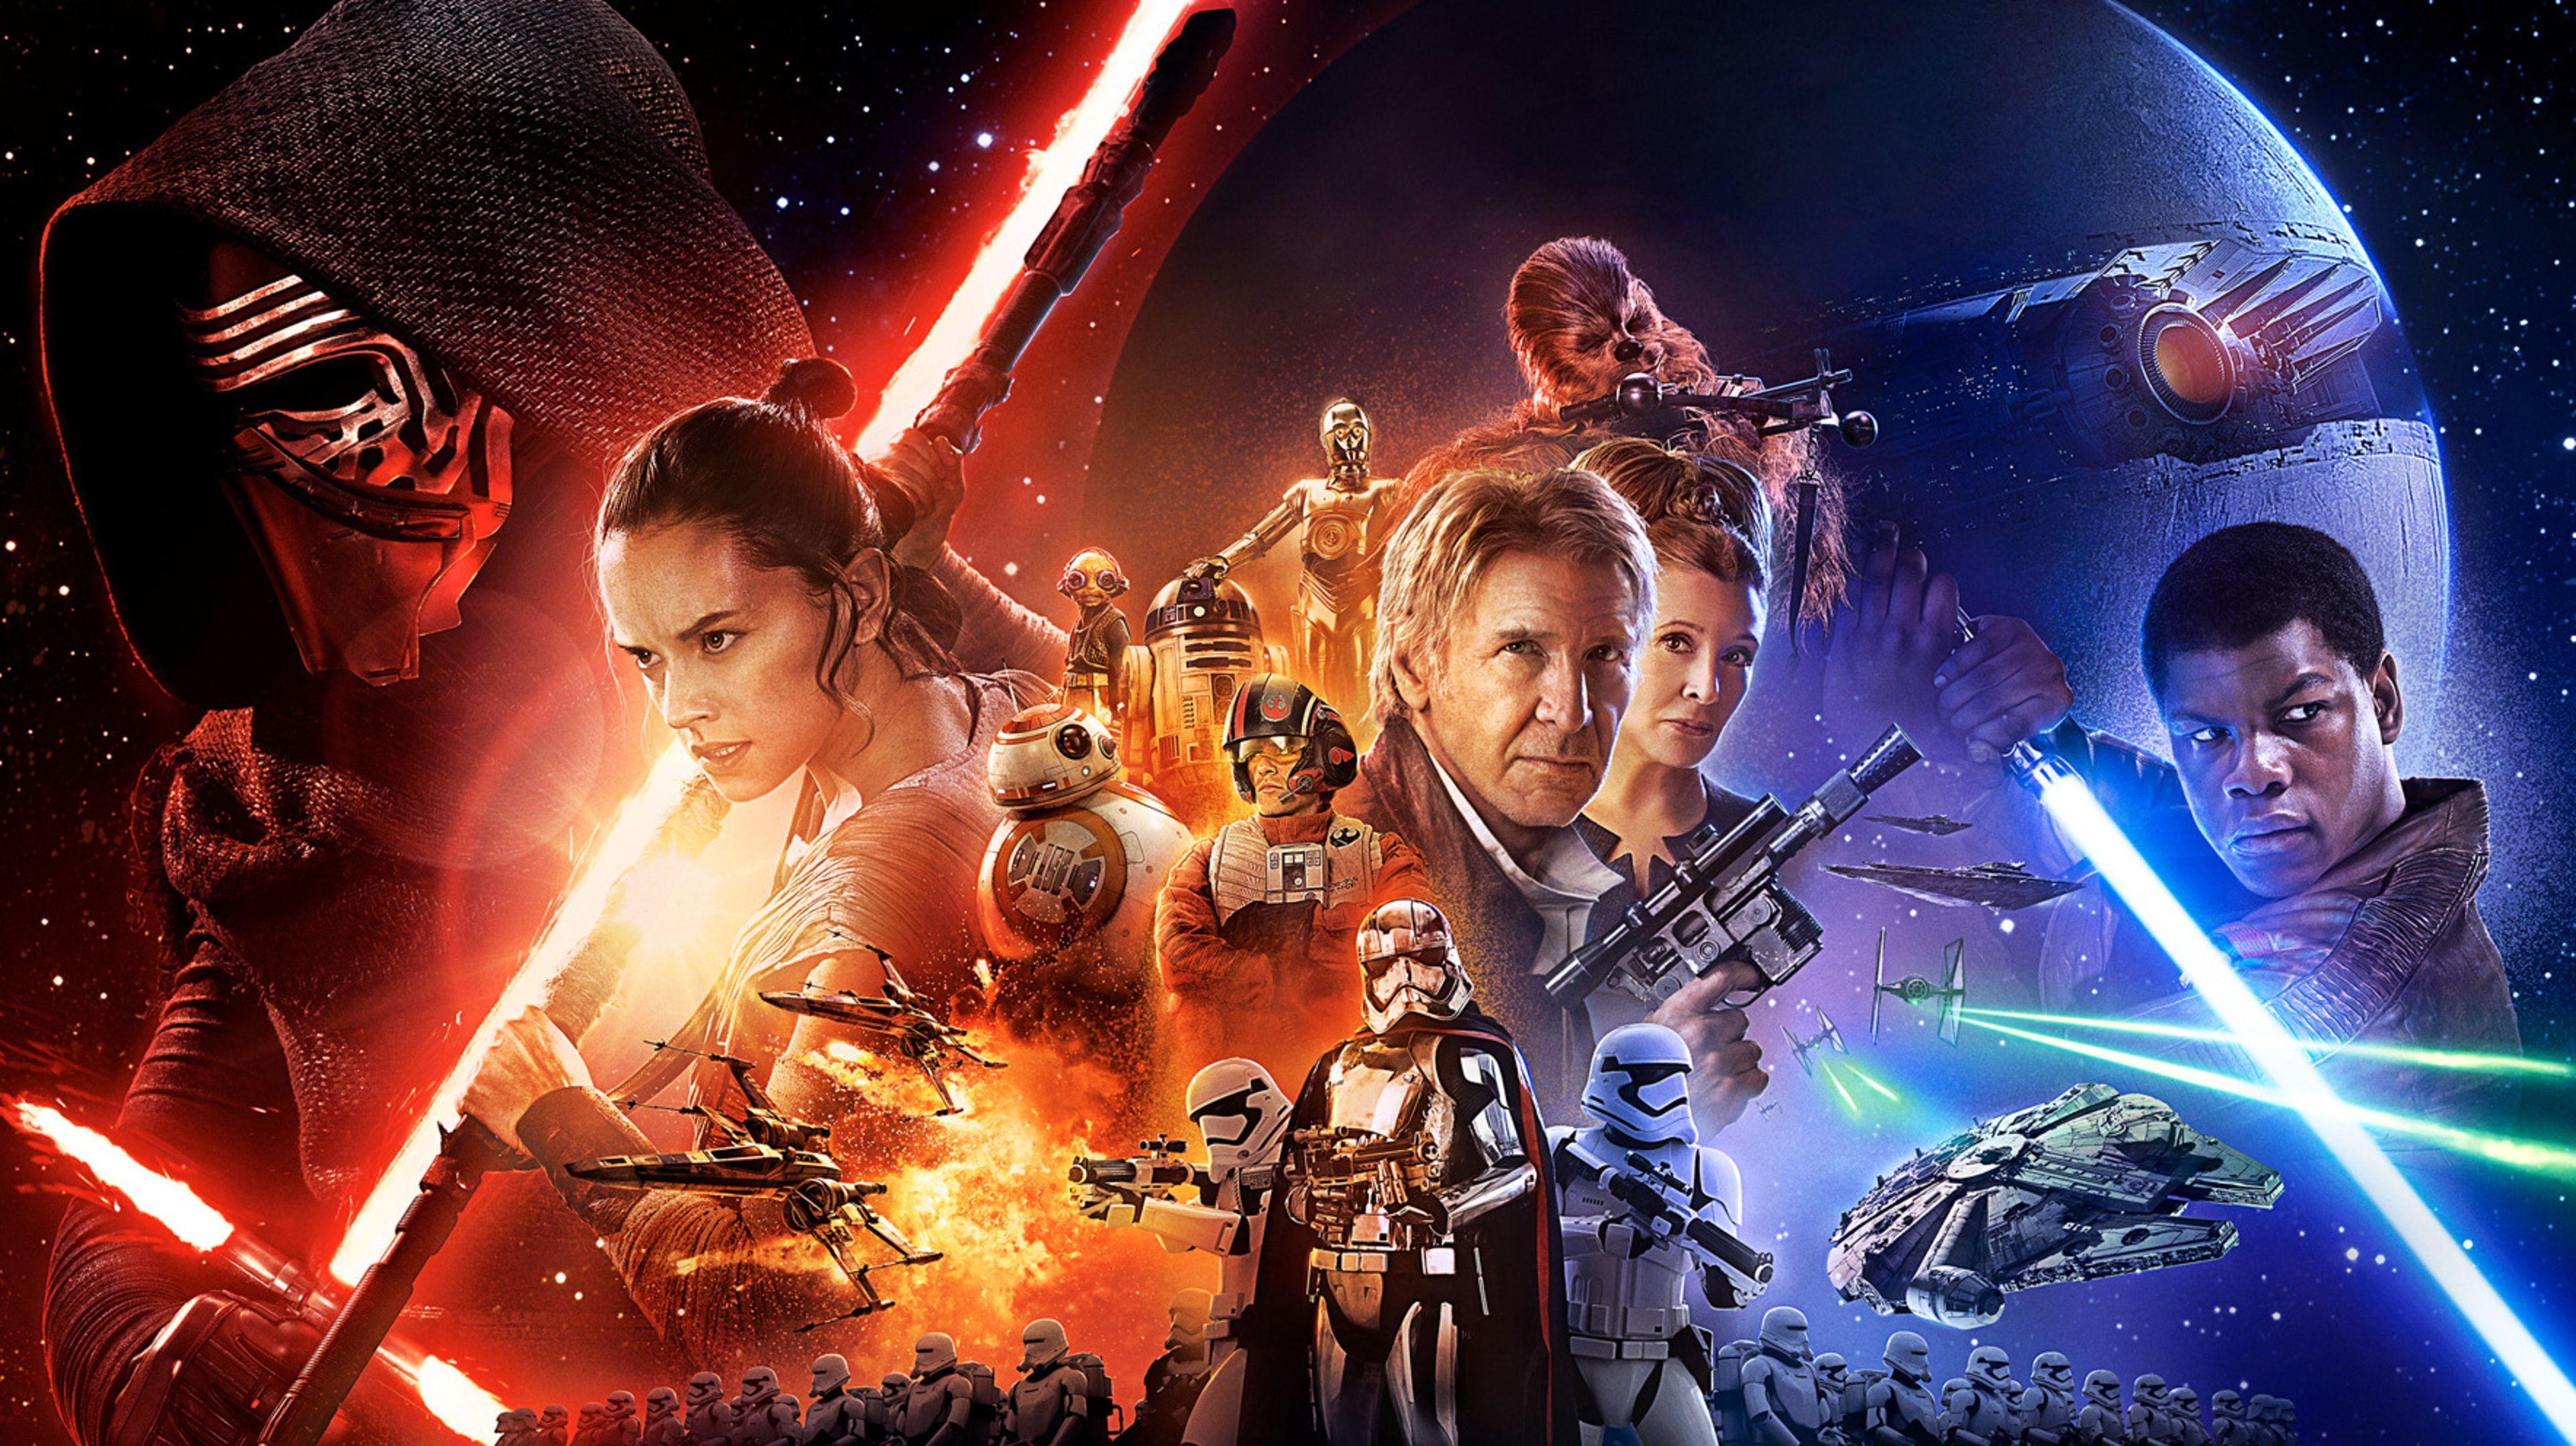 Star Wars The Force Awakens Wallpapers Full HD : Movies Wallpapers